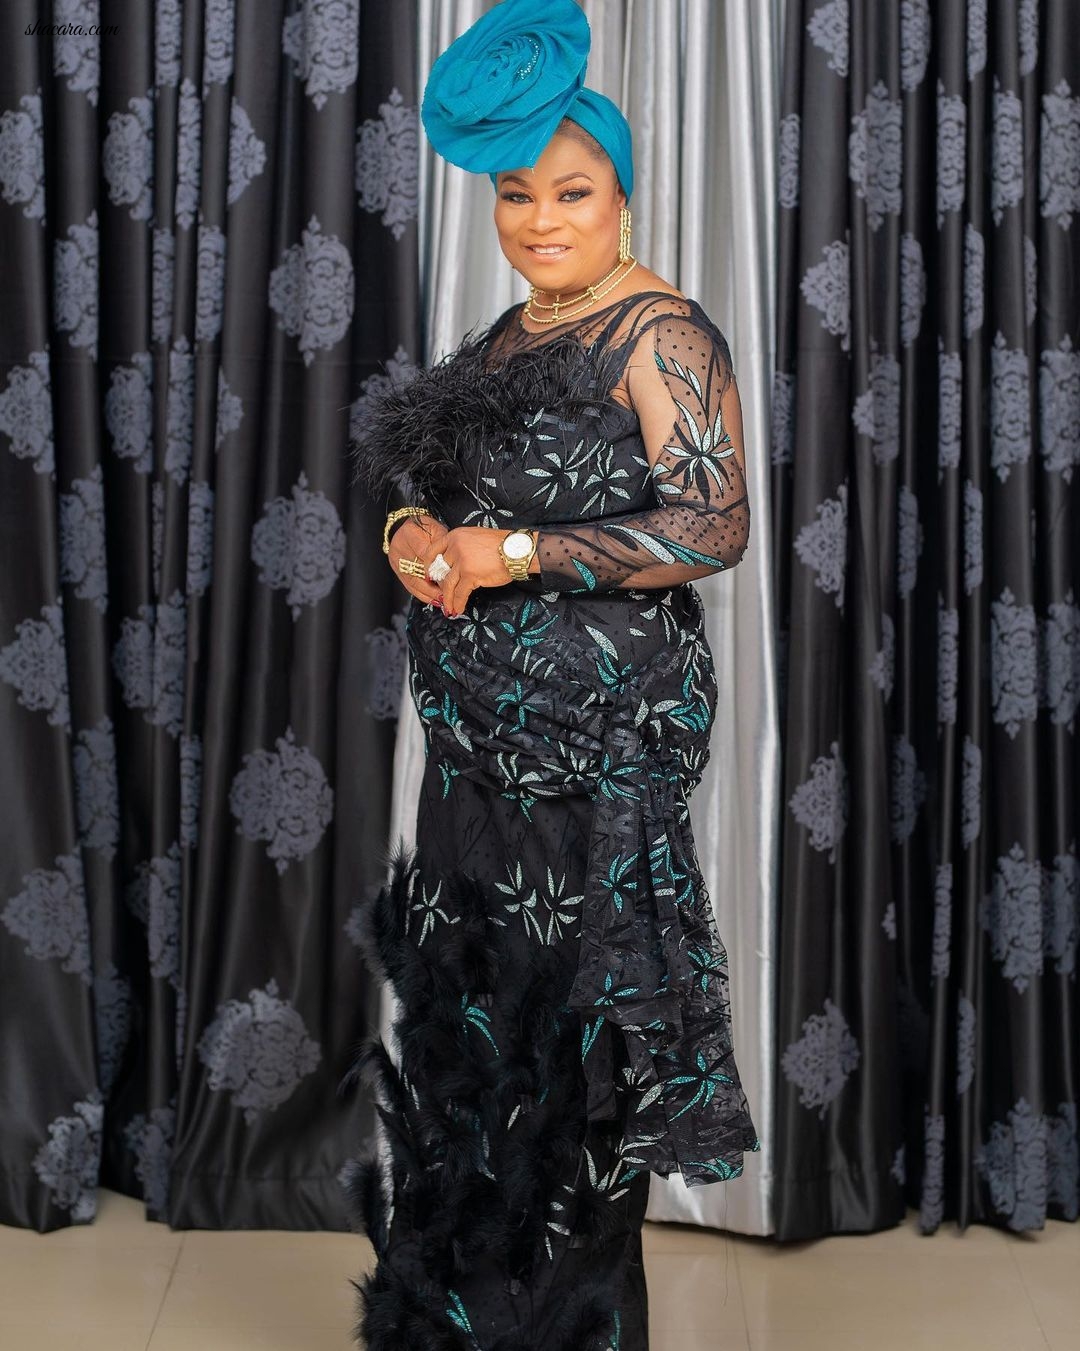 Nollywood Legend Sola Sobowale Celebrates 57th Birthday In Style